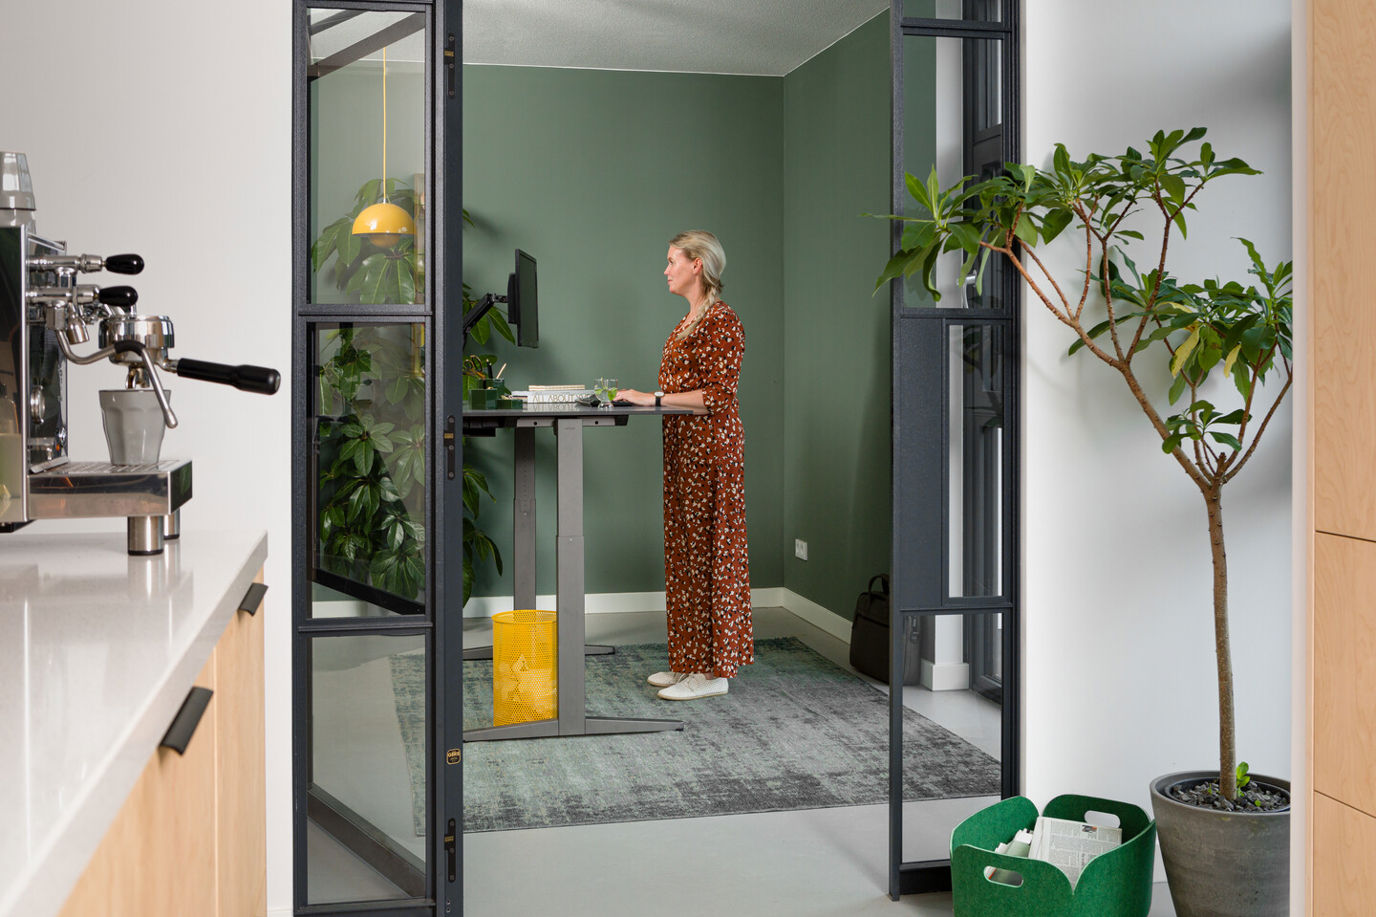 Landscapexl Royal Ahrend Balance Workstation In Grey With Charcoal Tabletop In Standing Position With Female Model Interior View